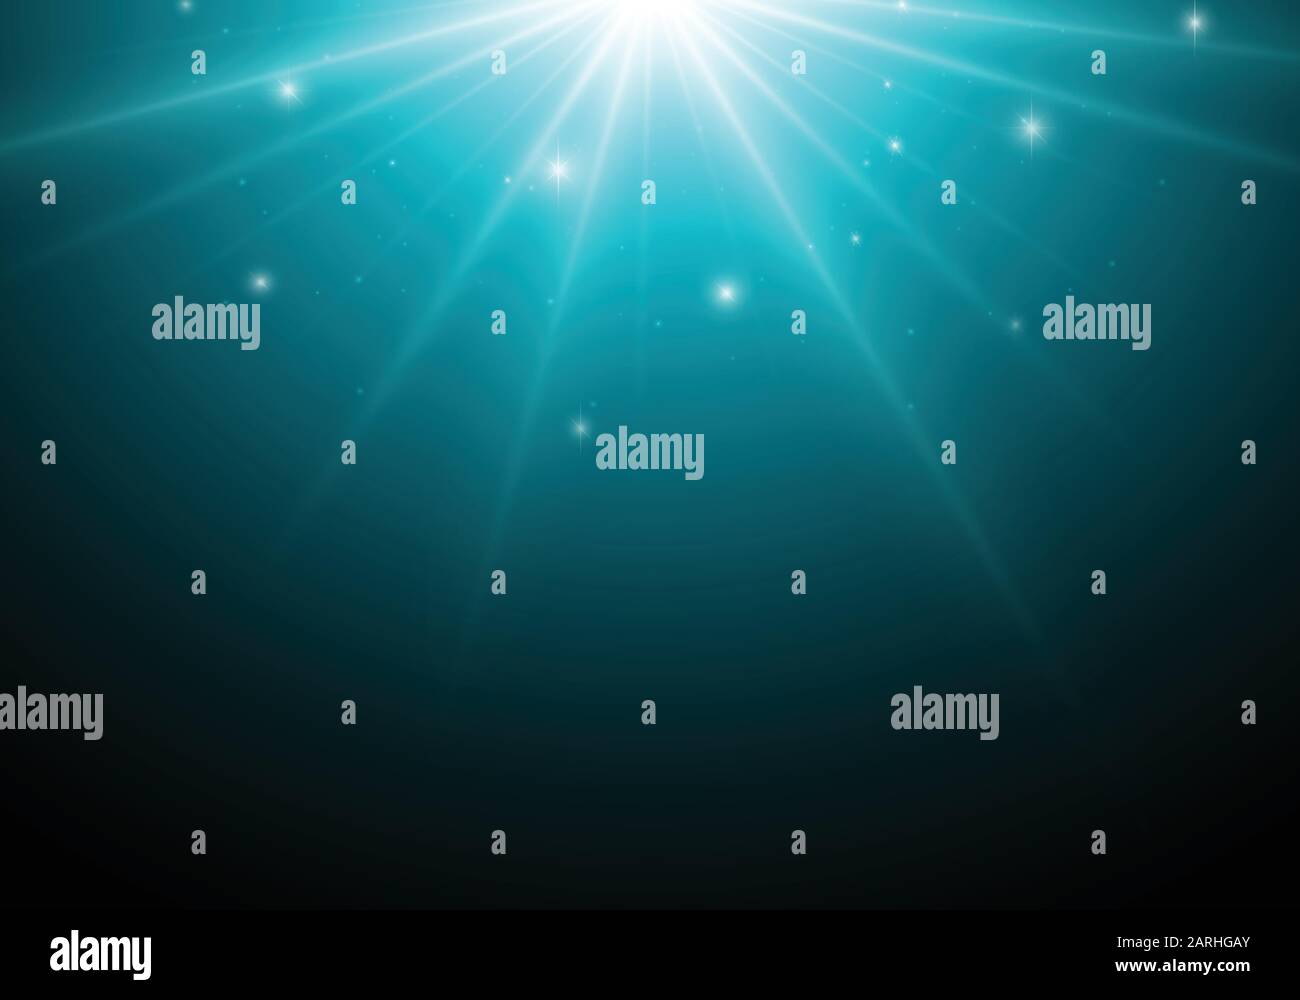 Magic dark background with blue star, lights. Stock Vector